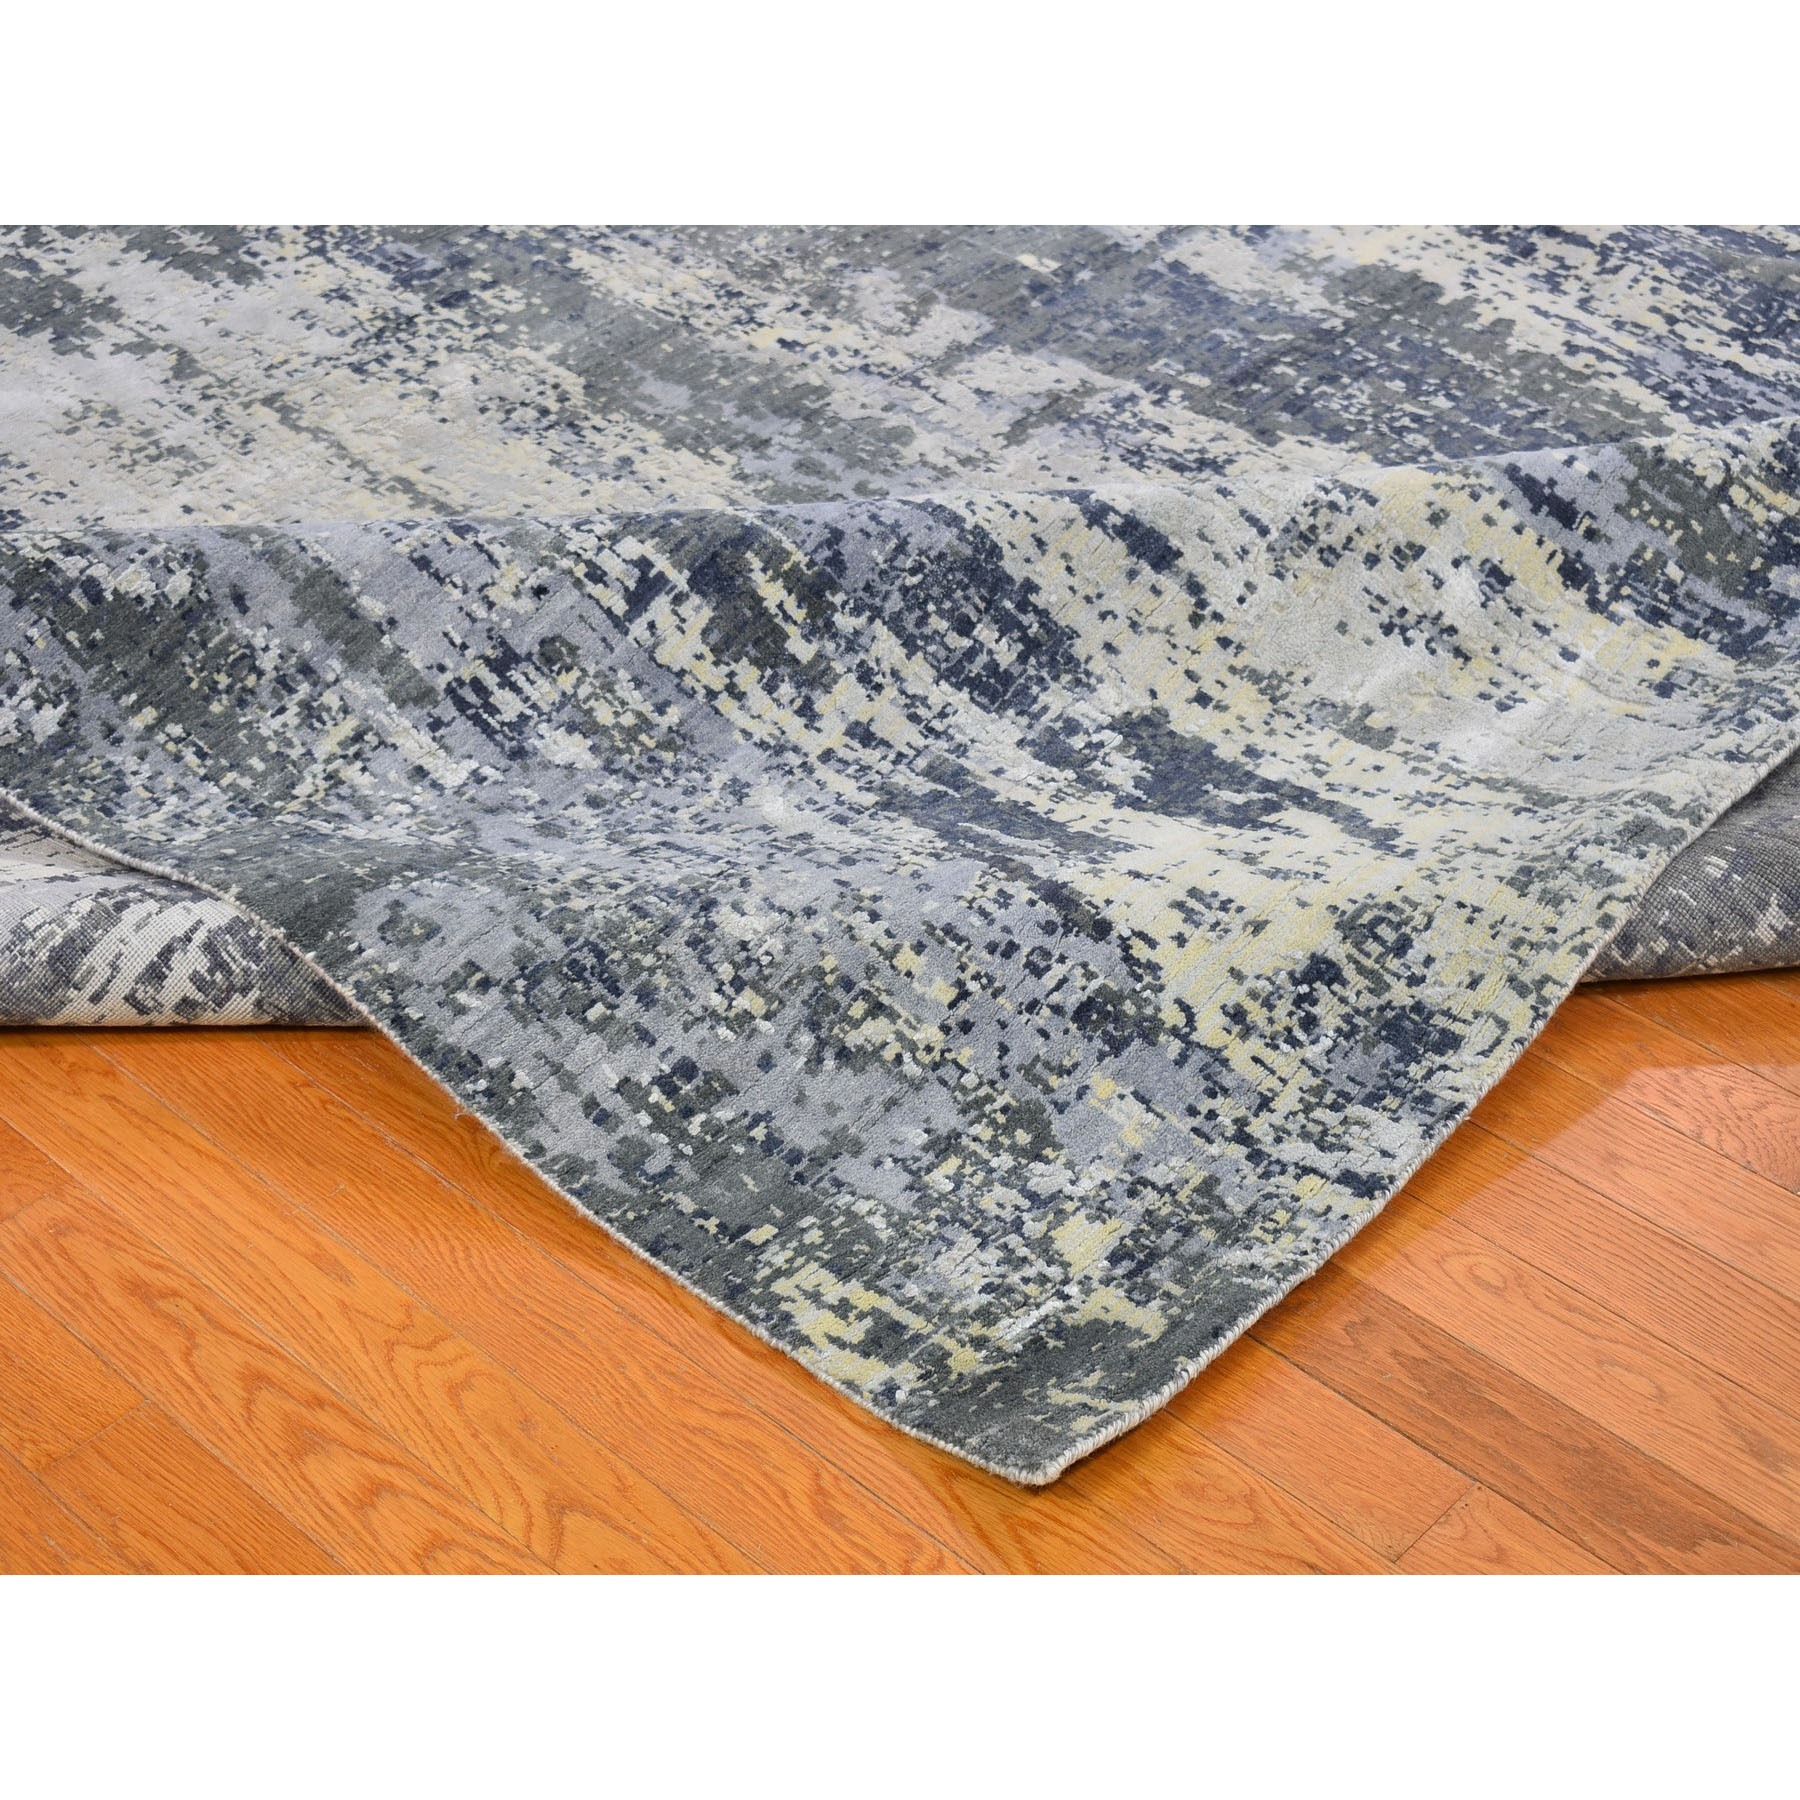 12'x18'1" Oversized Abstract Design with Persian Knot Wool and Silk Denser Weave Charcoal Gray Hand Woven Oriental Rug 